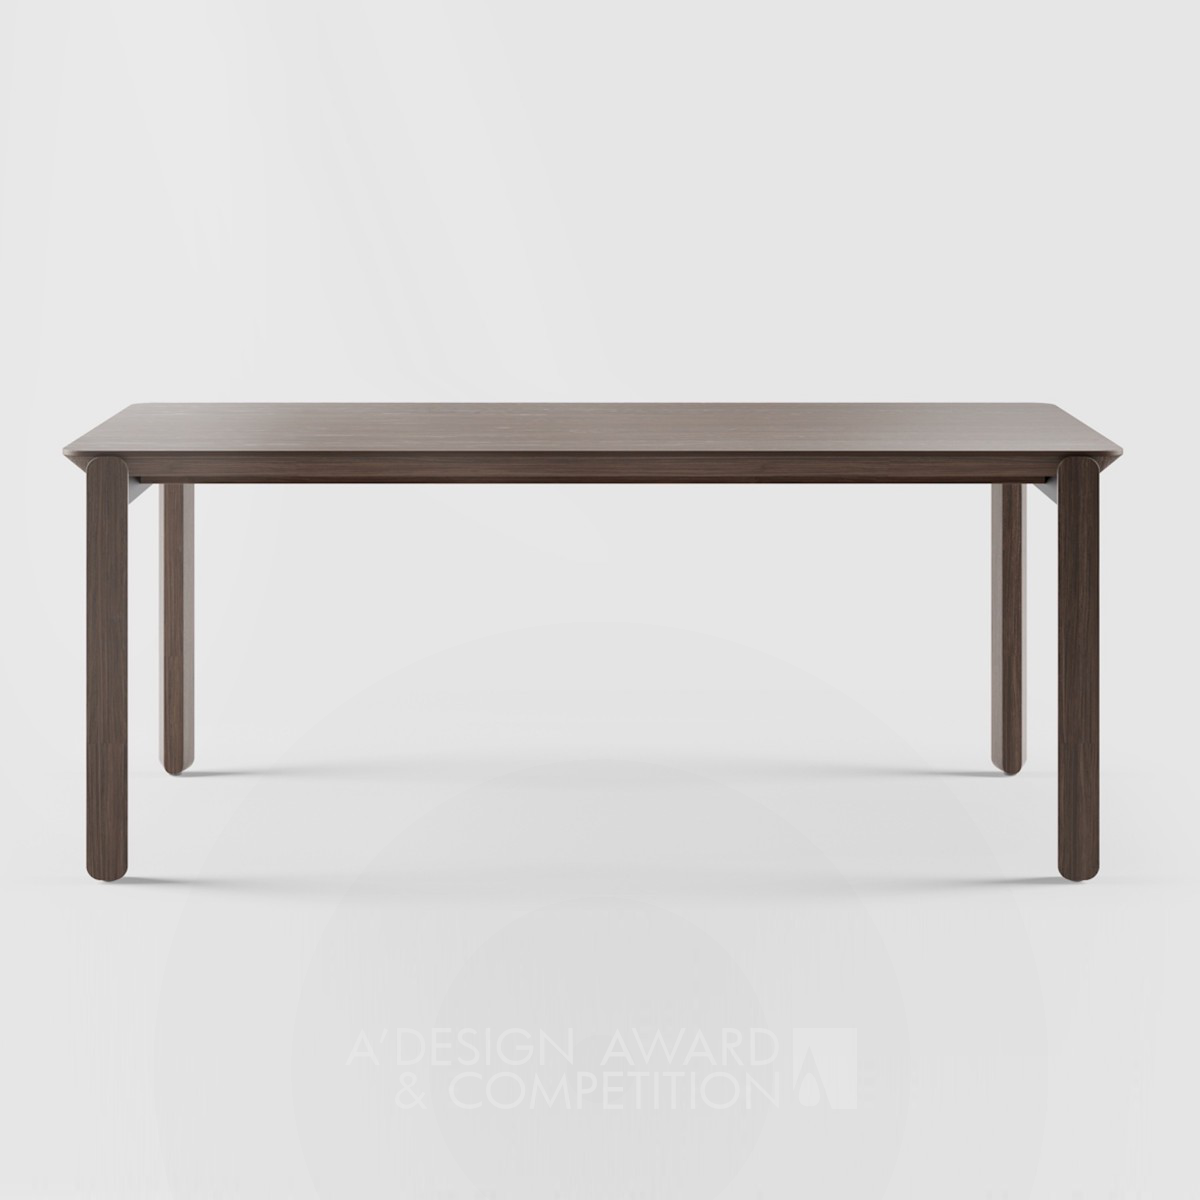 Popsitable Table by Daniel Huang